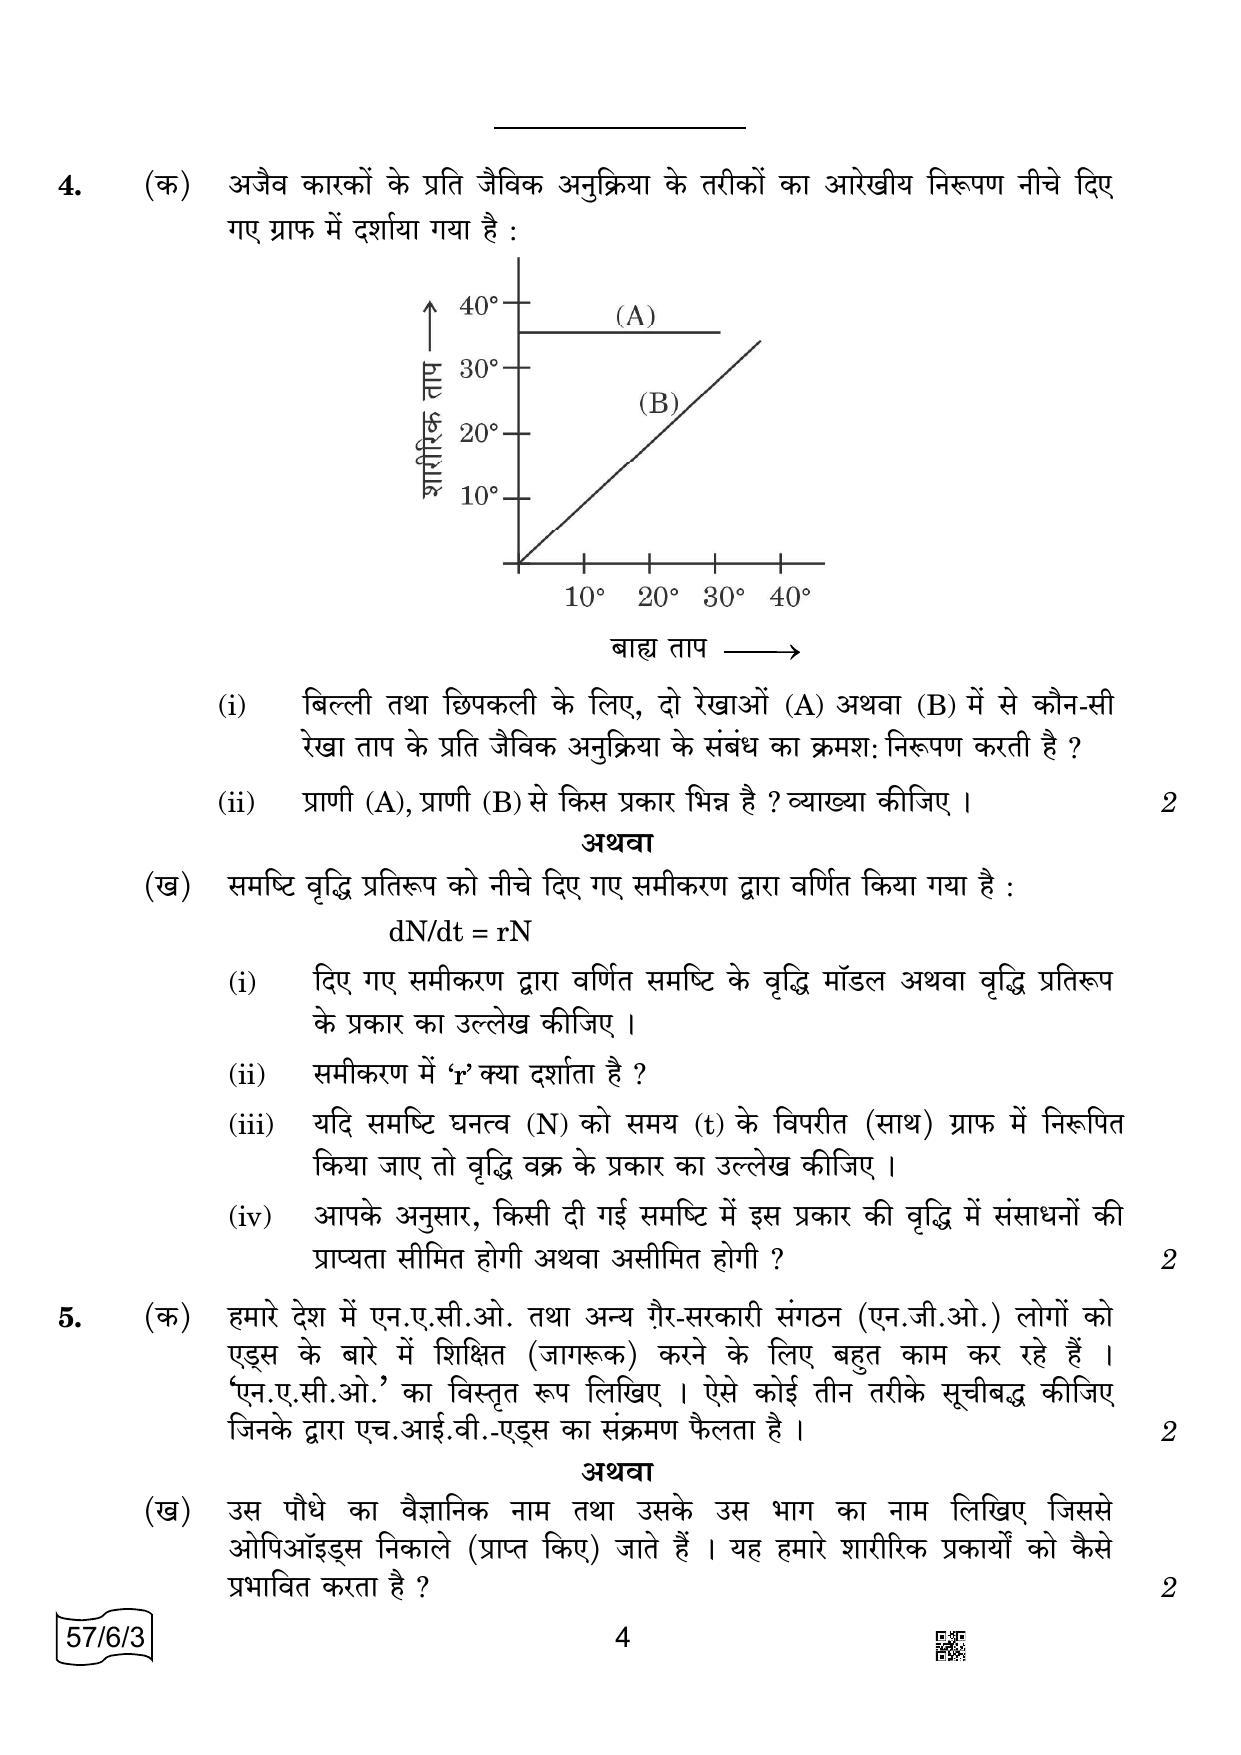 CBSE Class 12 57-6-3 BIOLOGY 2022 Compartment Question Paper - Page 4